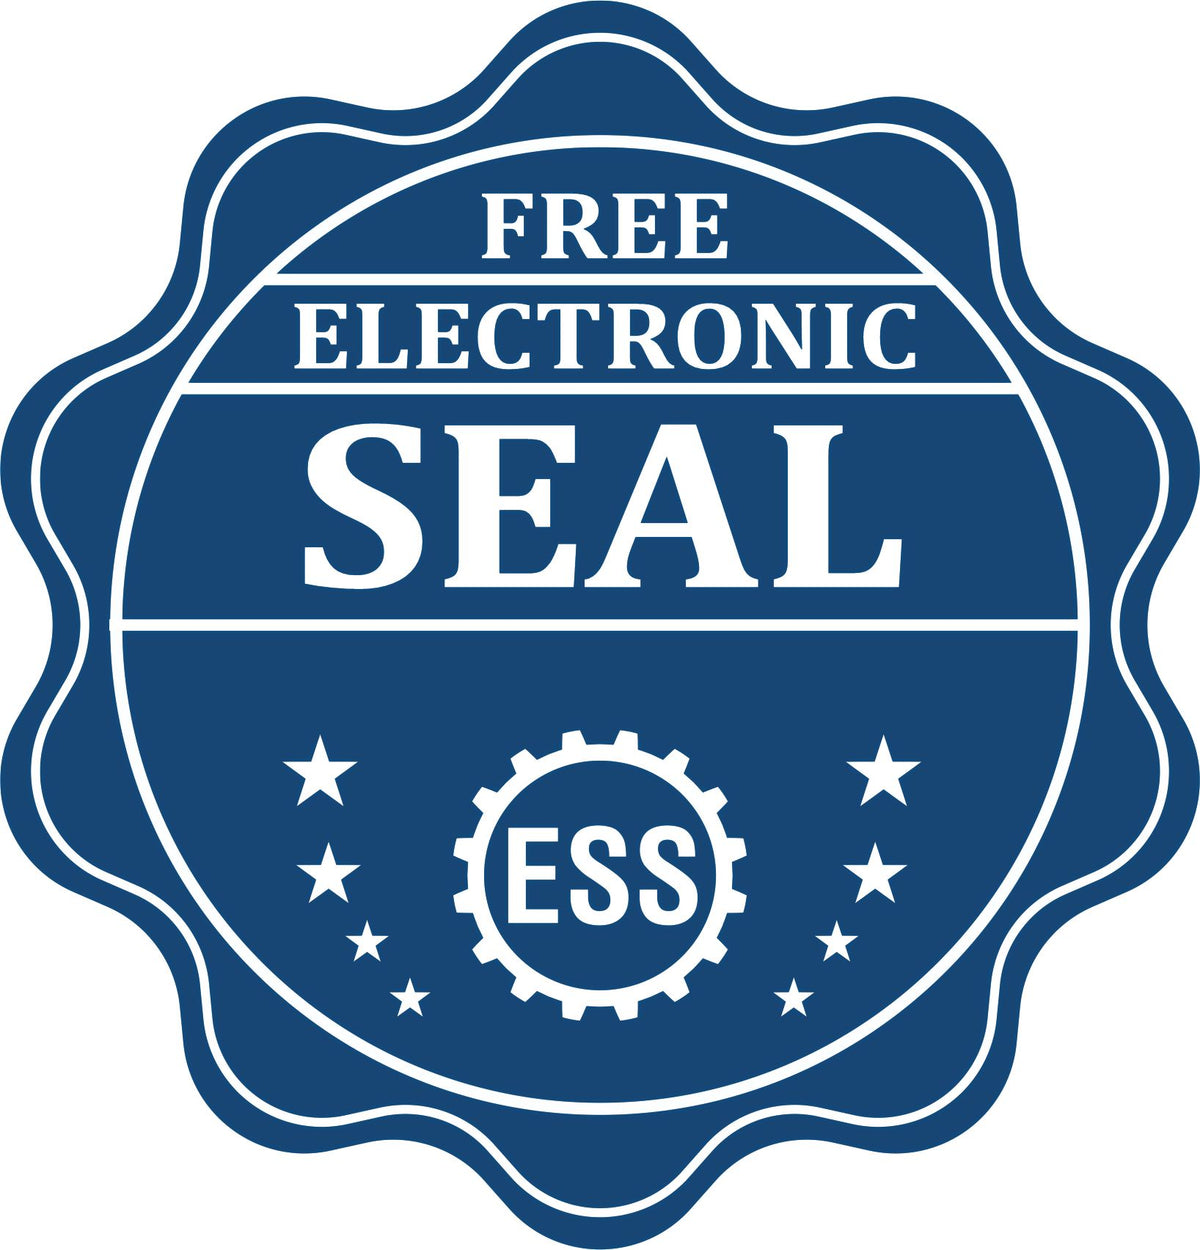 A badge showing a free electronic seal for the Handheld Alaska Professional Geologist Embosser with stars and the ESS gear on the emblem.